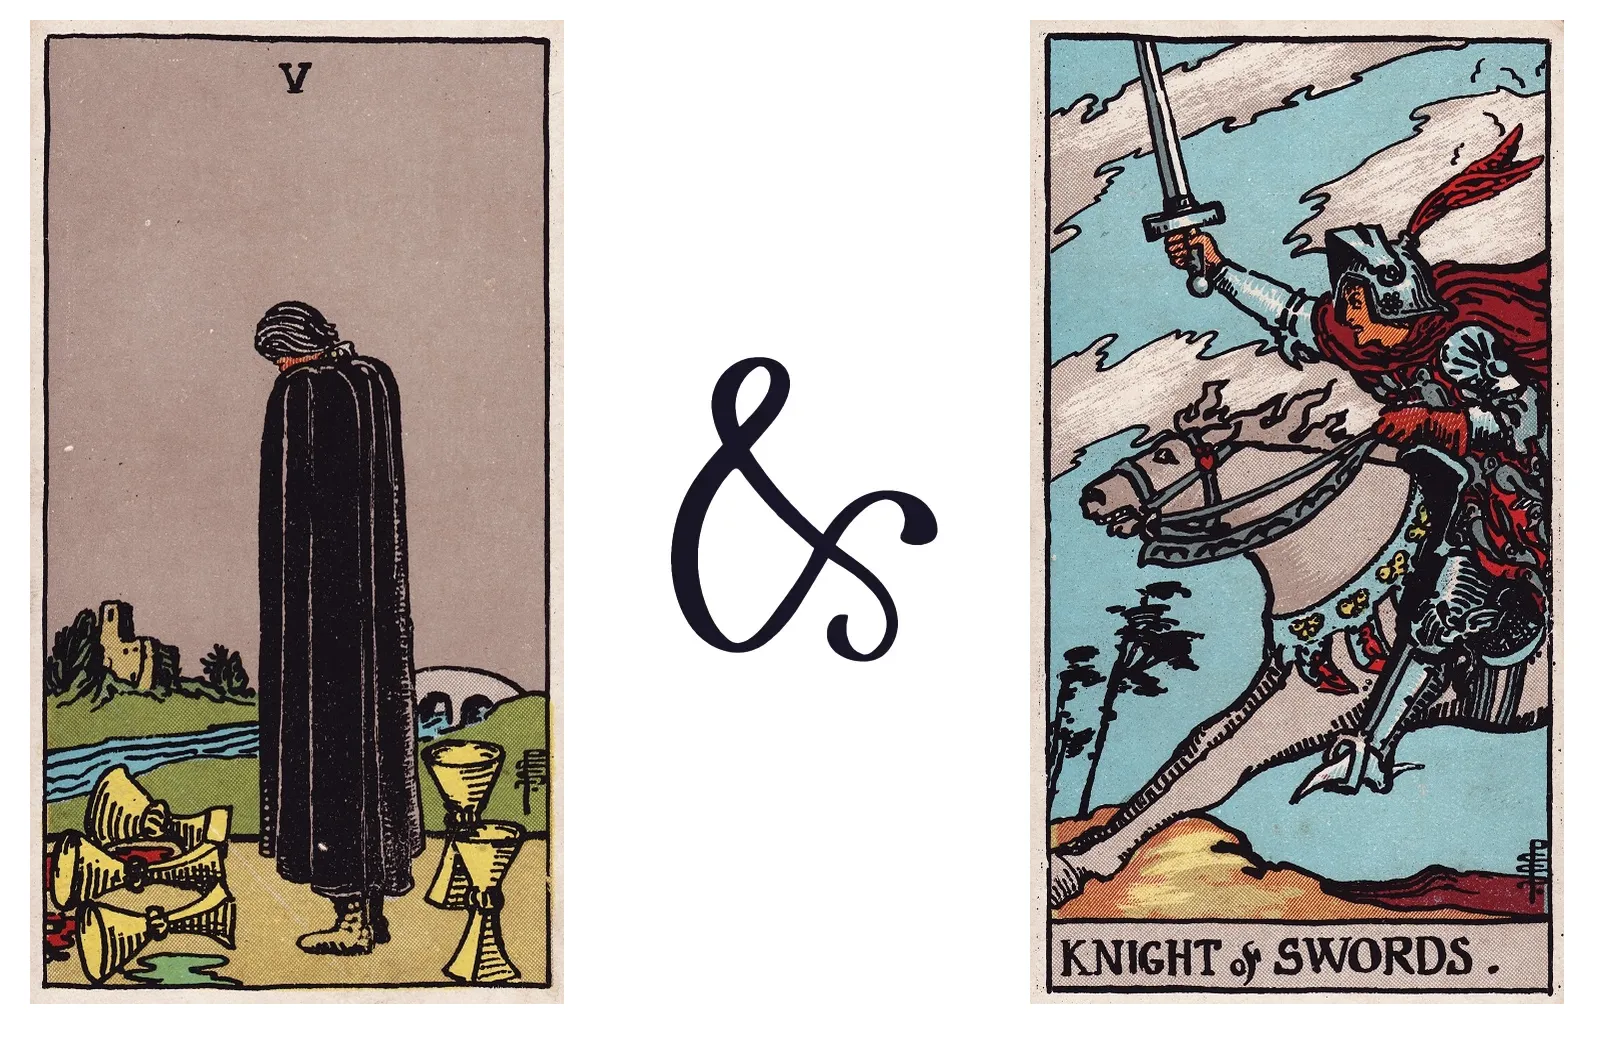 Five of Cups and Knight of Swords